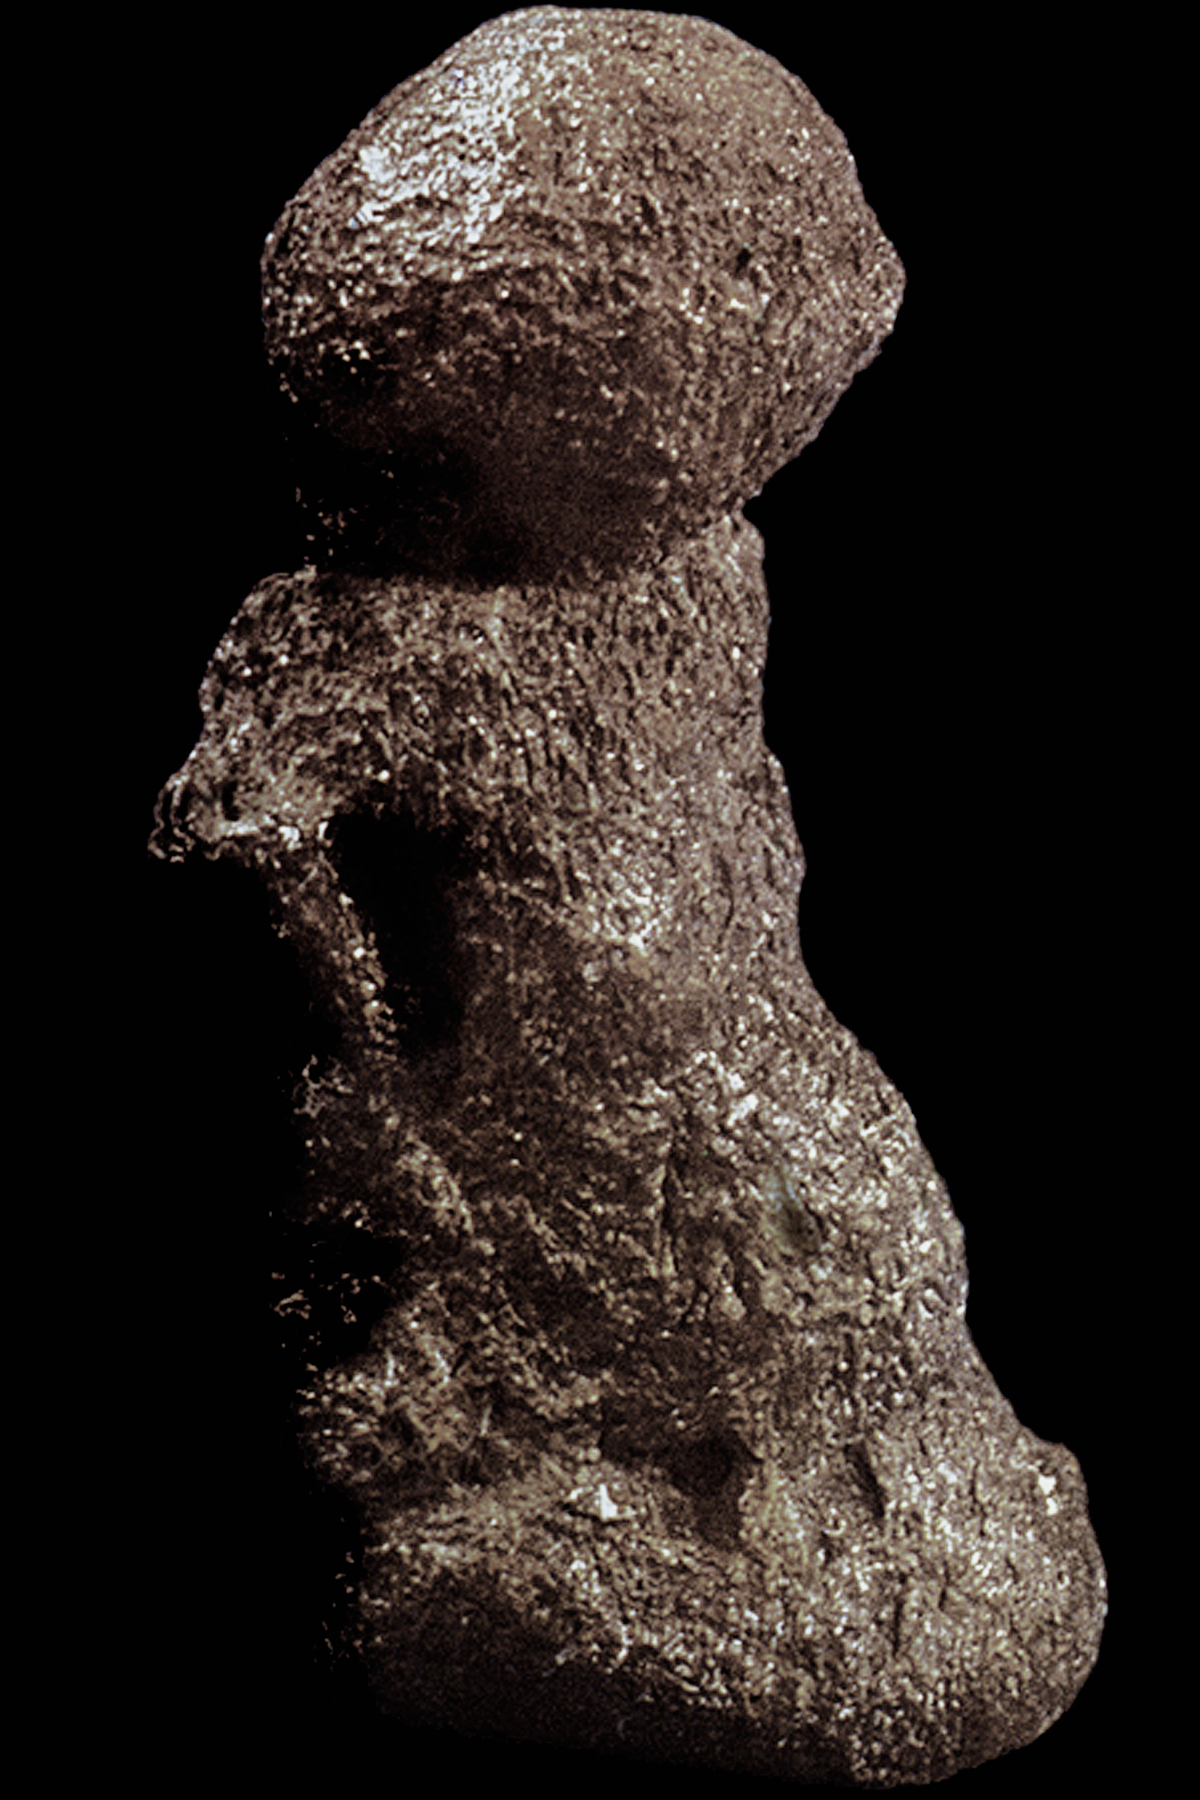 Predmost Figurine made from a Mammoth Middle Foot Bone Sculptures of the Ice Age